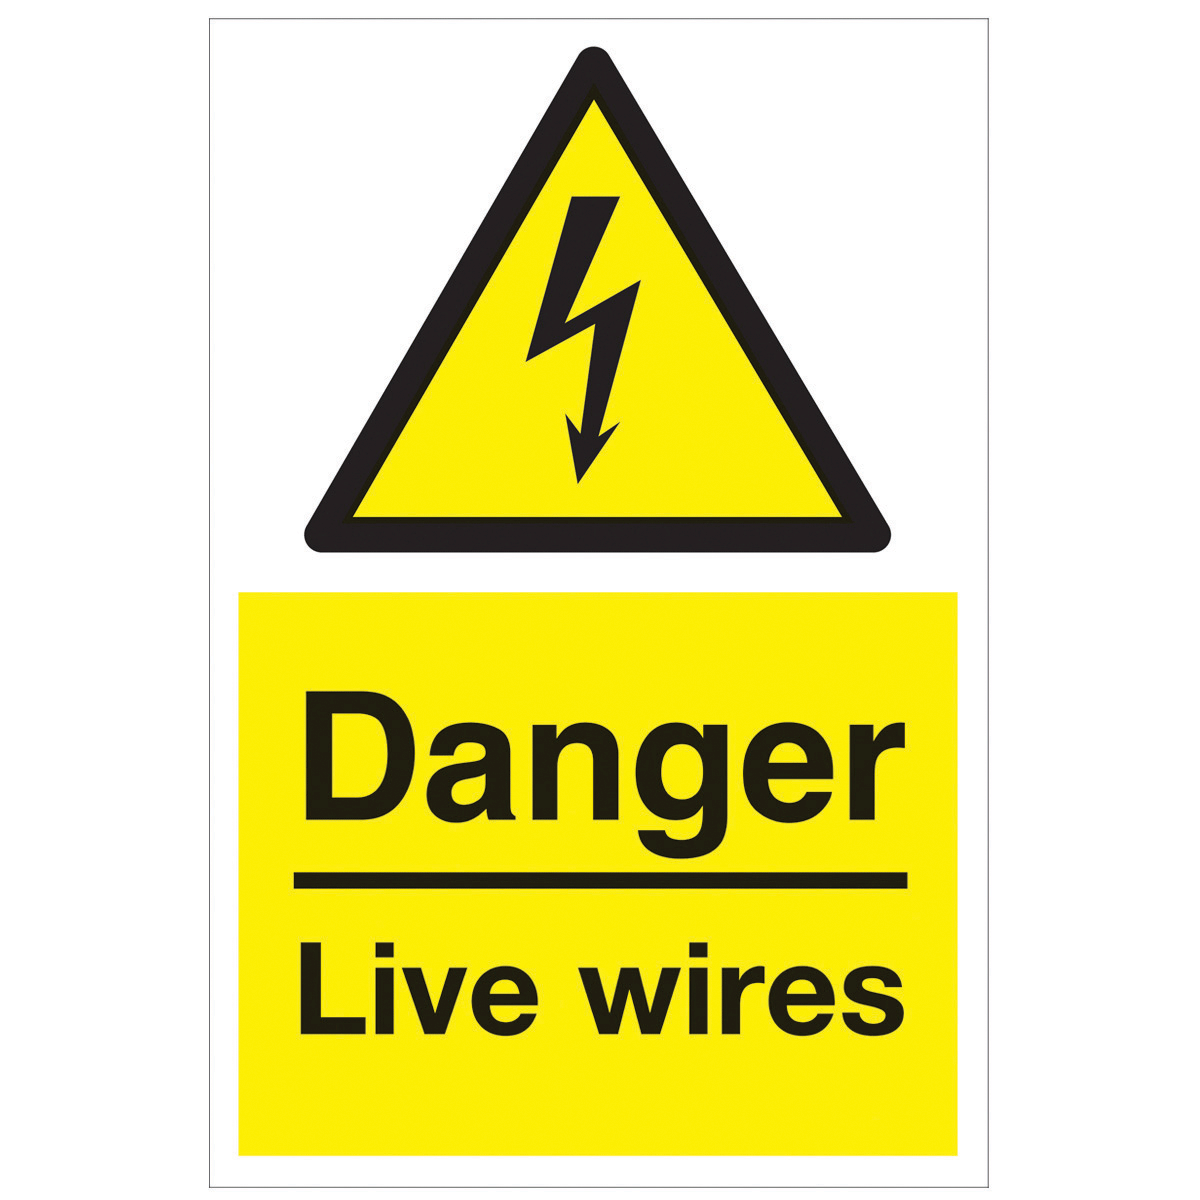 Warning Danger Live Wires Safety Sign - Hazard & Warning Sign from ...